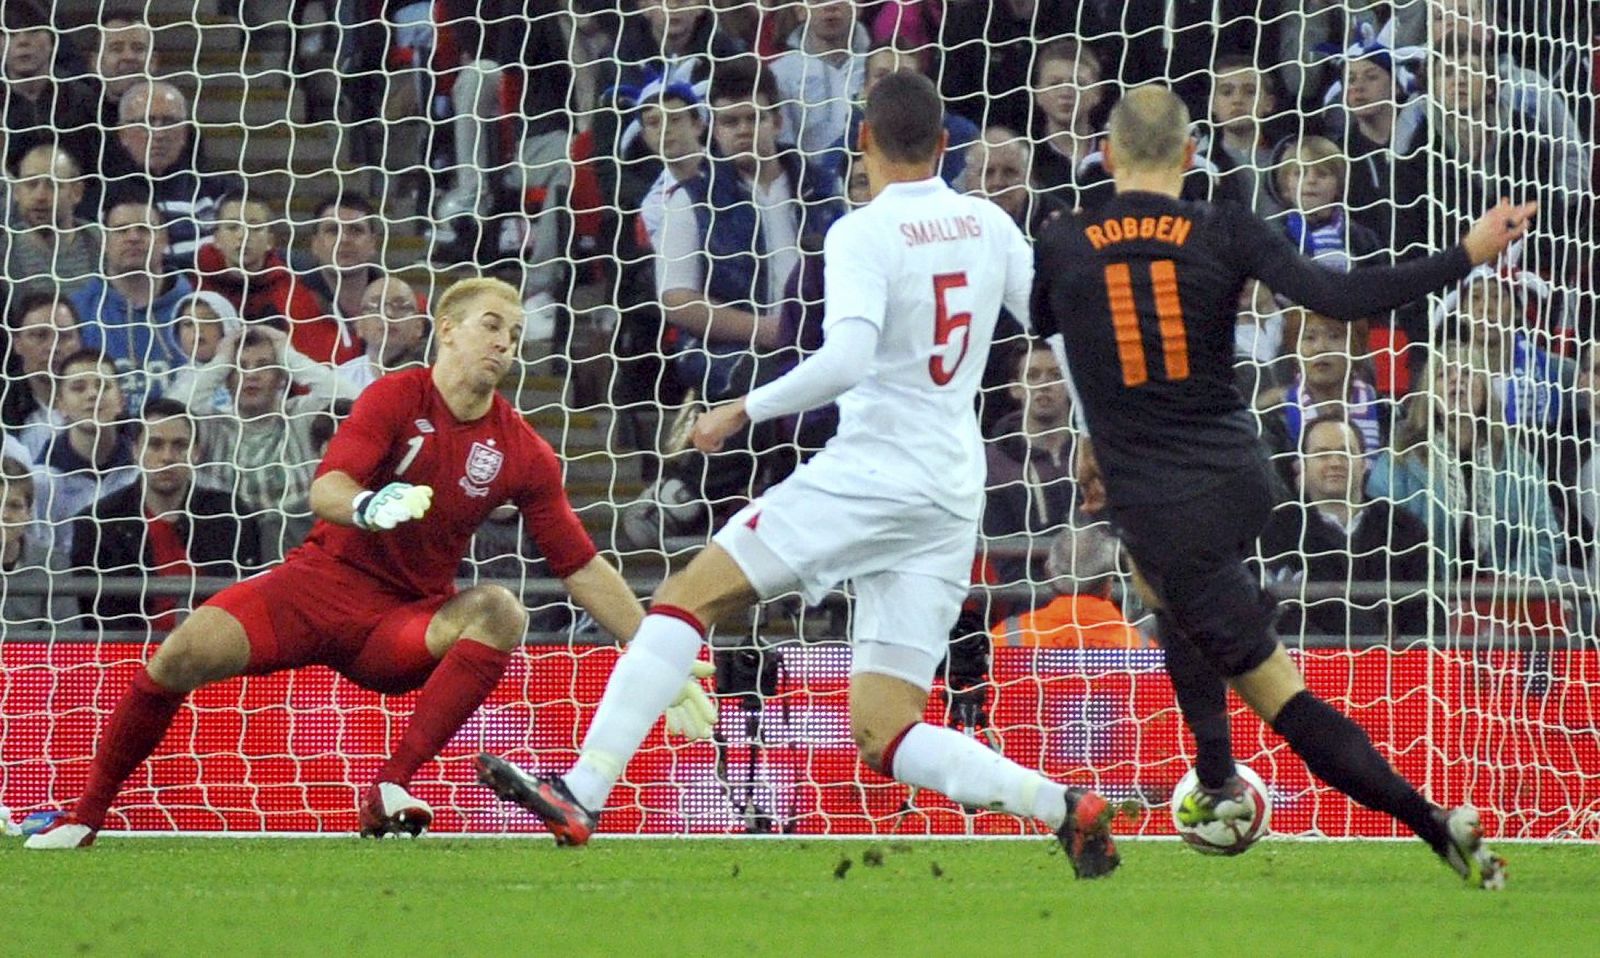 Holland's Arjen Robben scores against England during their international friendly soccer match at Wembley Stadium in London